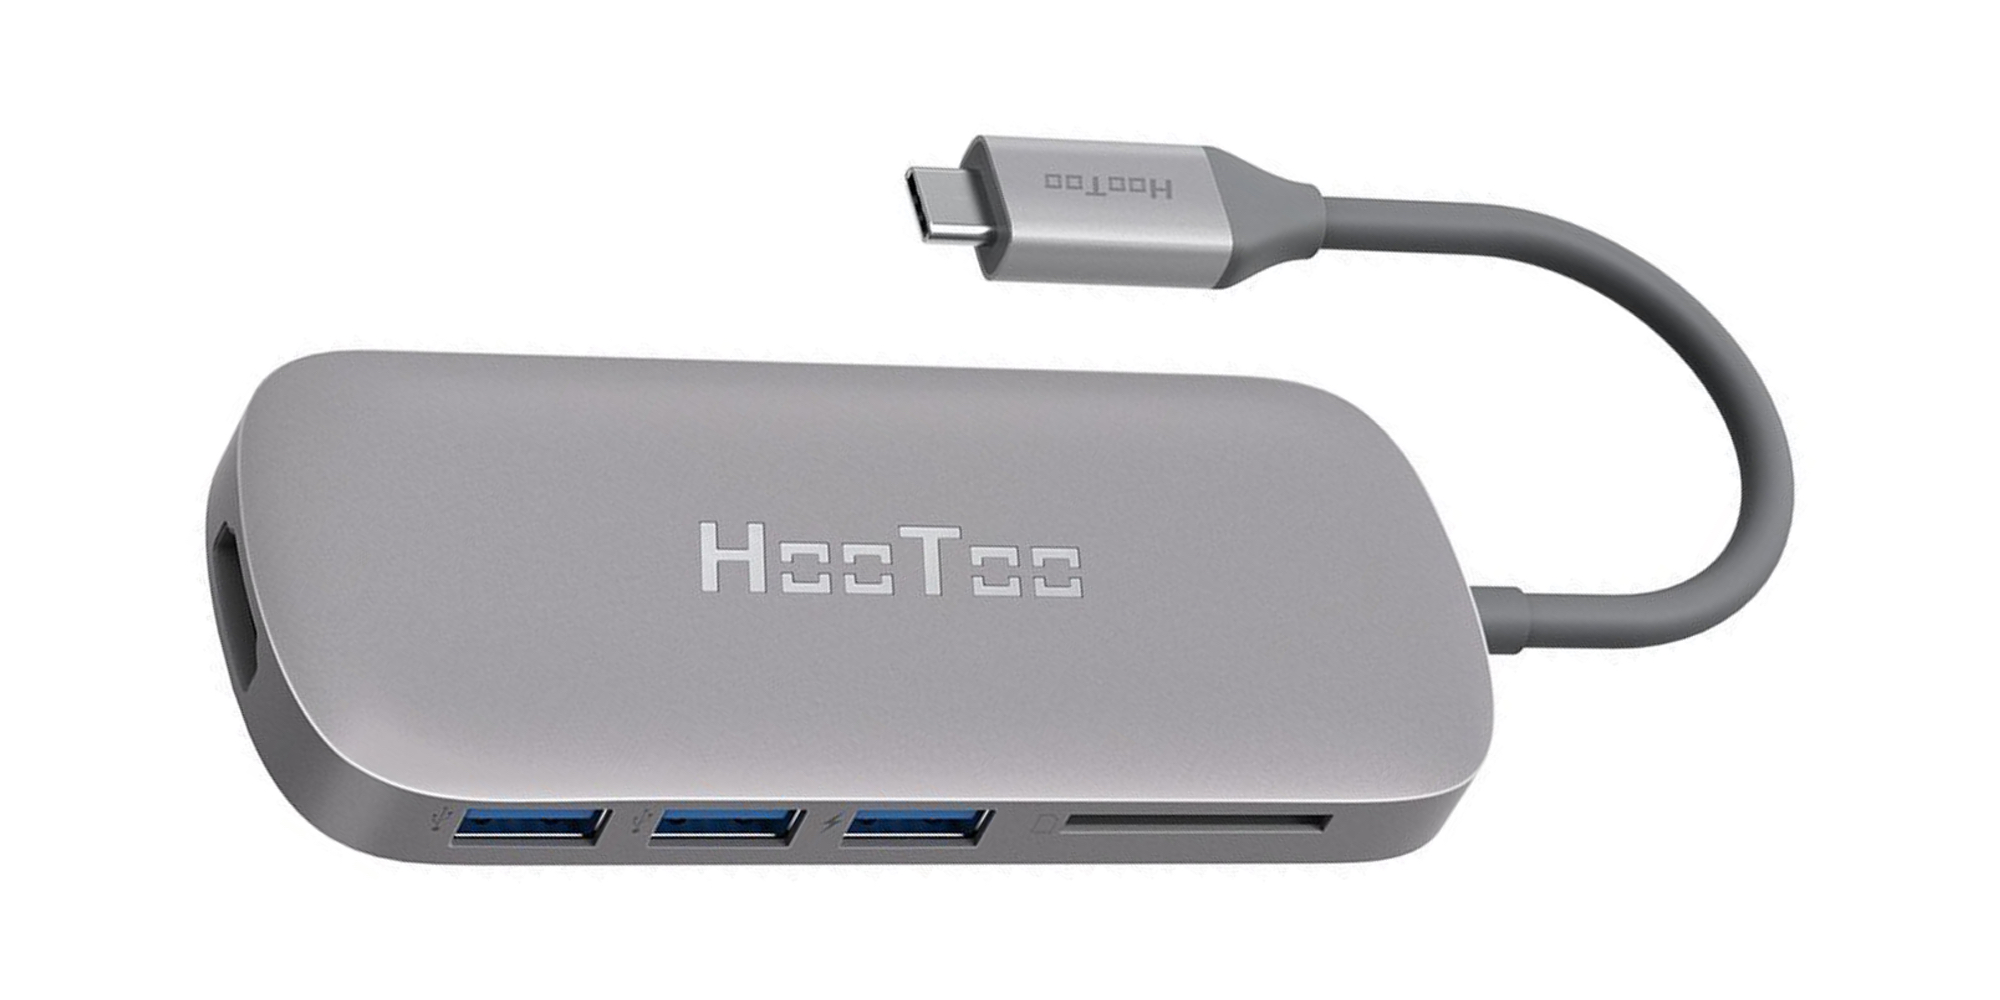 Bring HDMI, USB 3.0 and SD inputs to your w/ HooToo's USB-C hub: $35